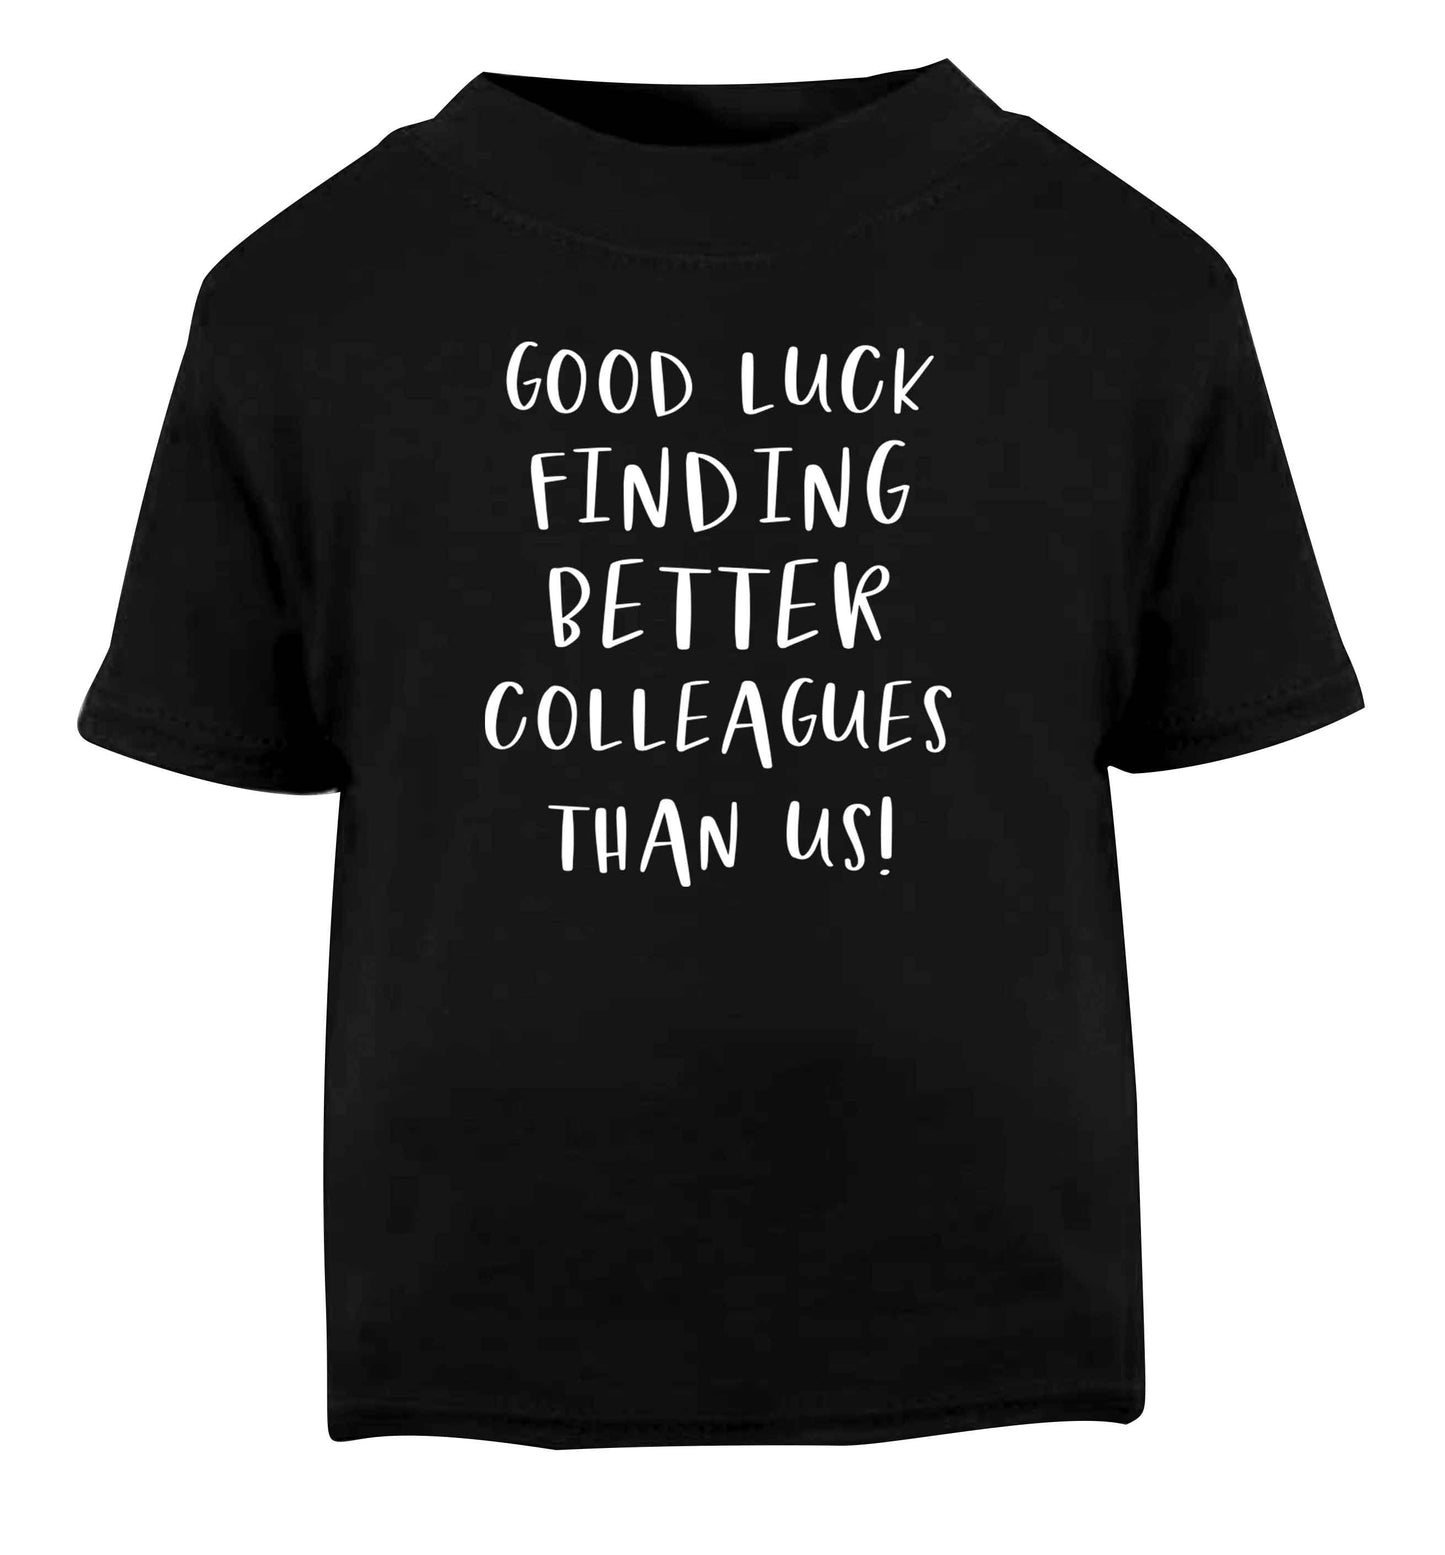 Good luck finding better colleagues than us! Black Baby Toddler Tshirt 2 years